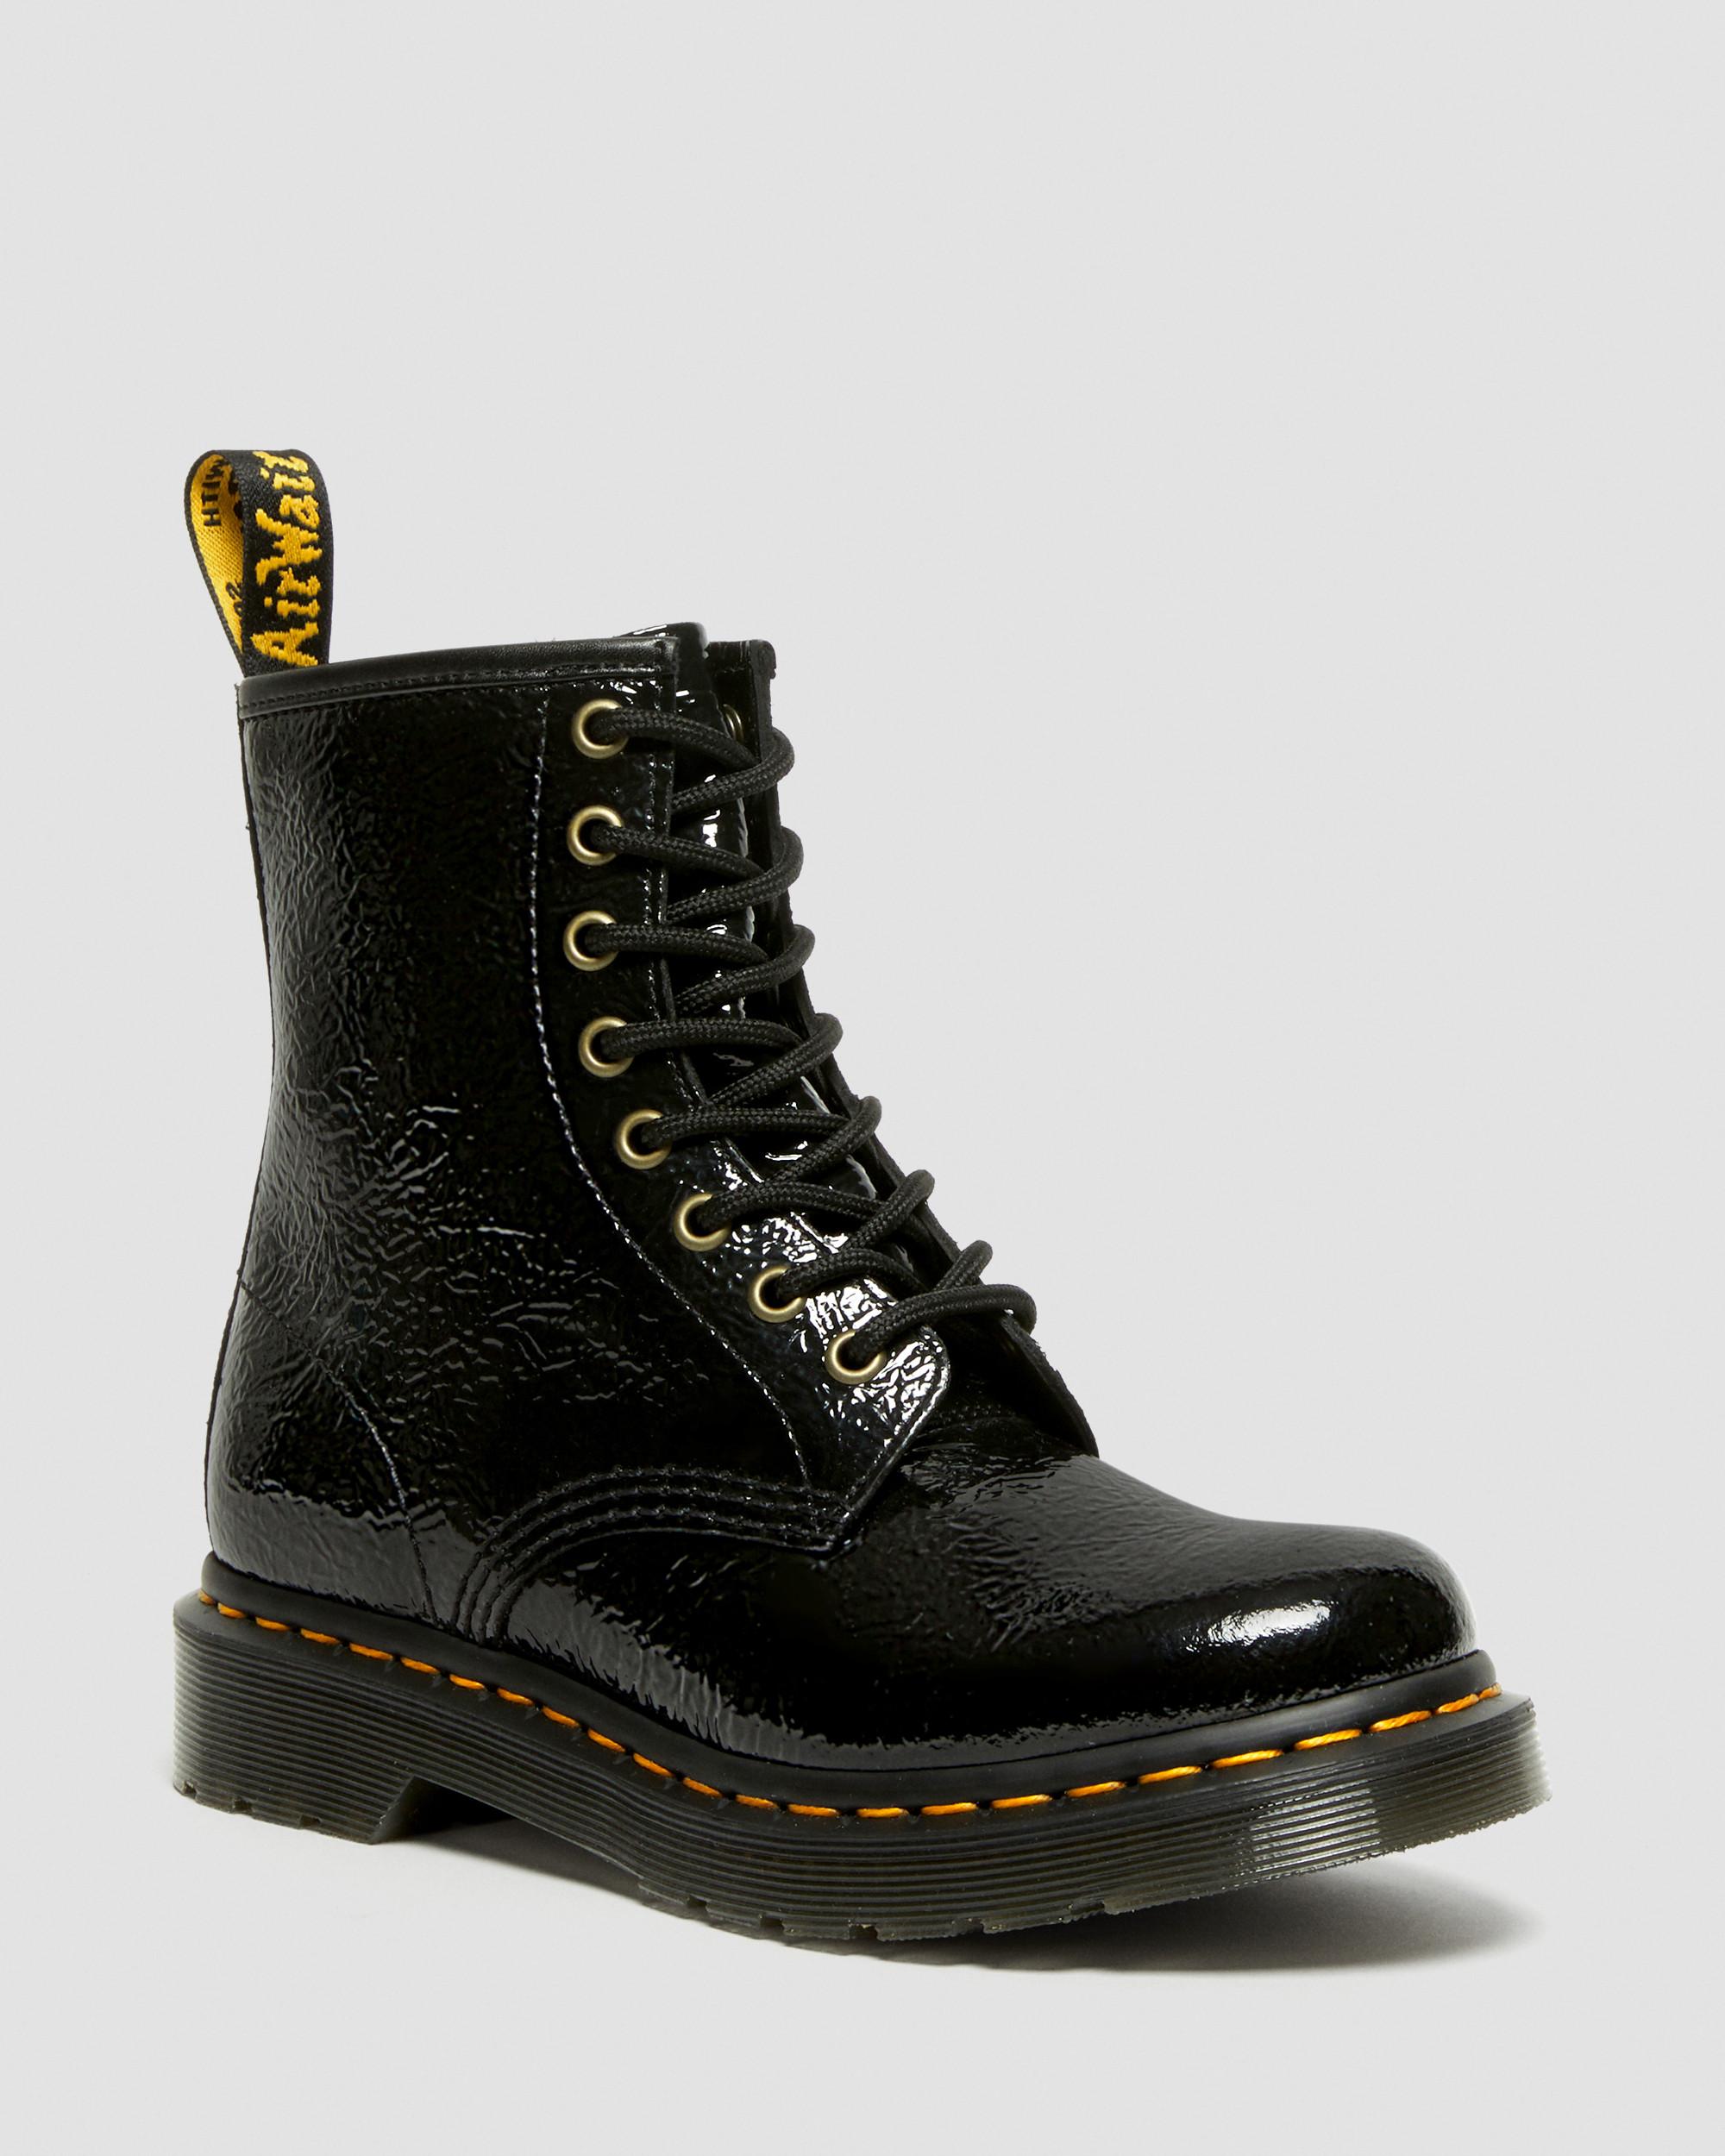 Perforatie overdrijving groef 1460 Women's Distressed Patent Leather Boots | Dr. Martens